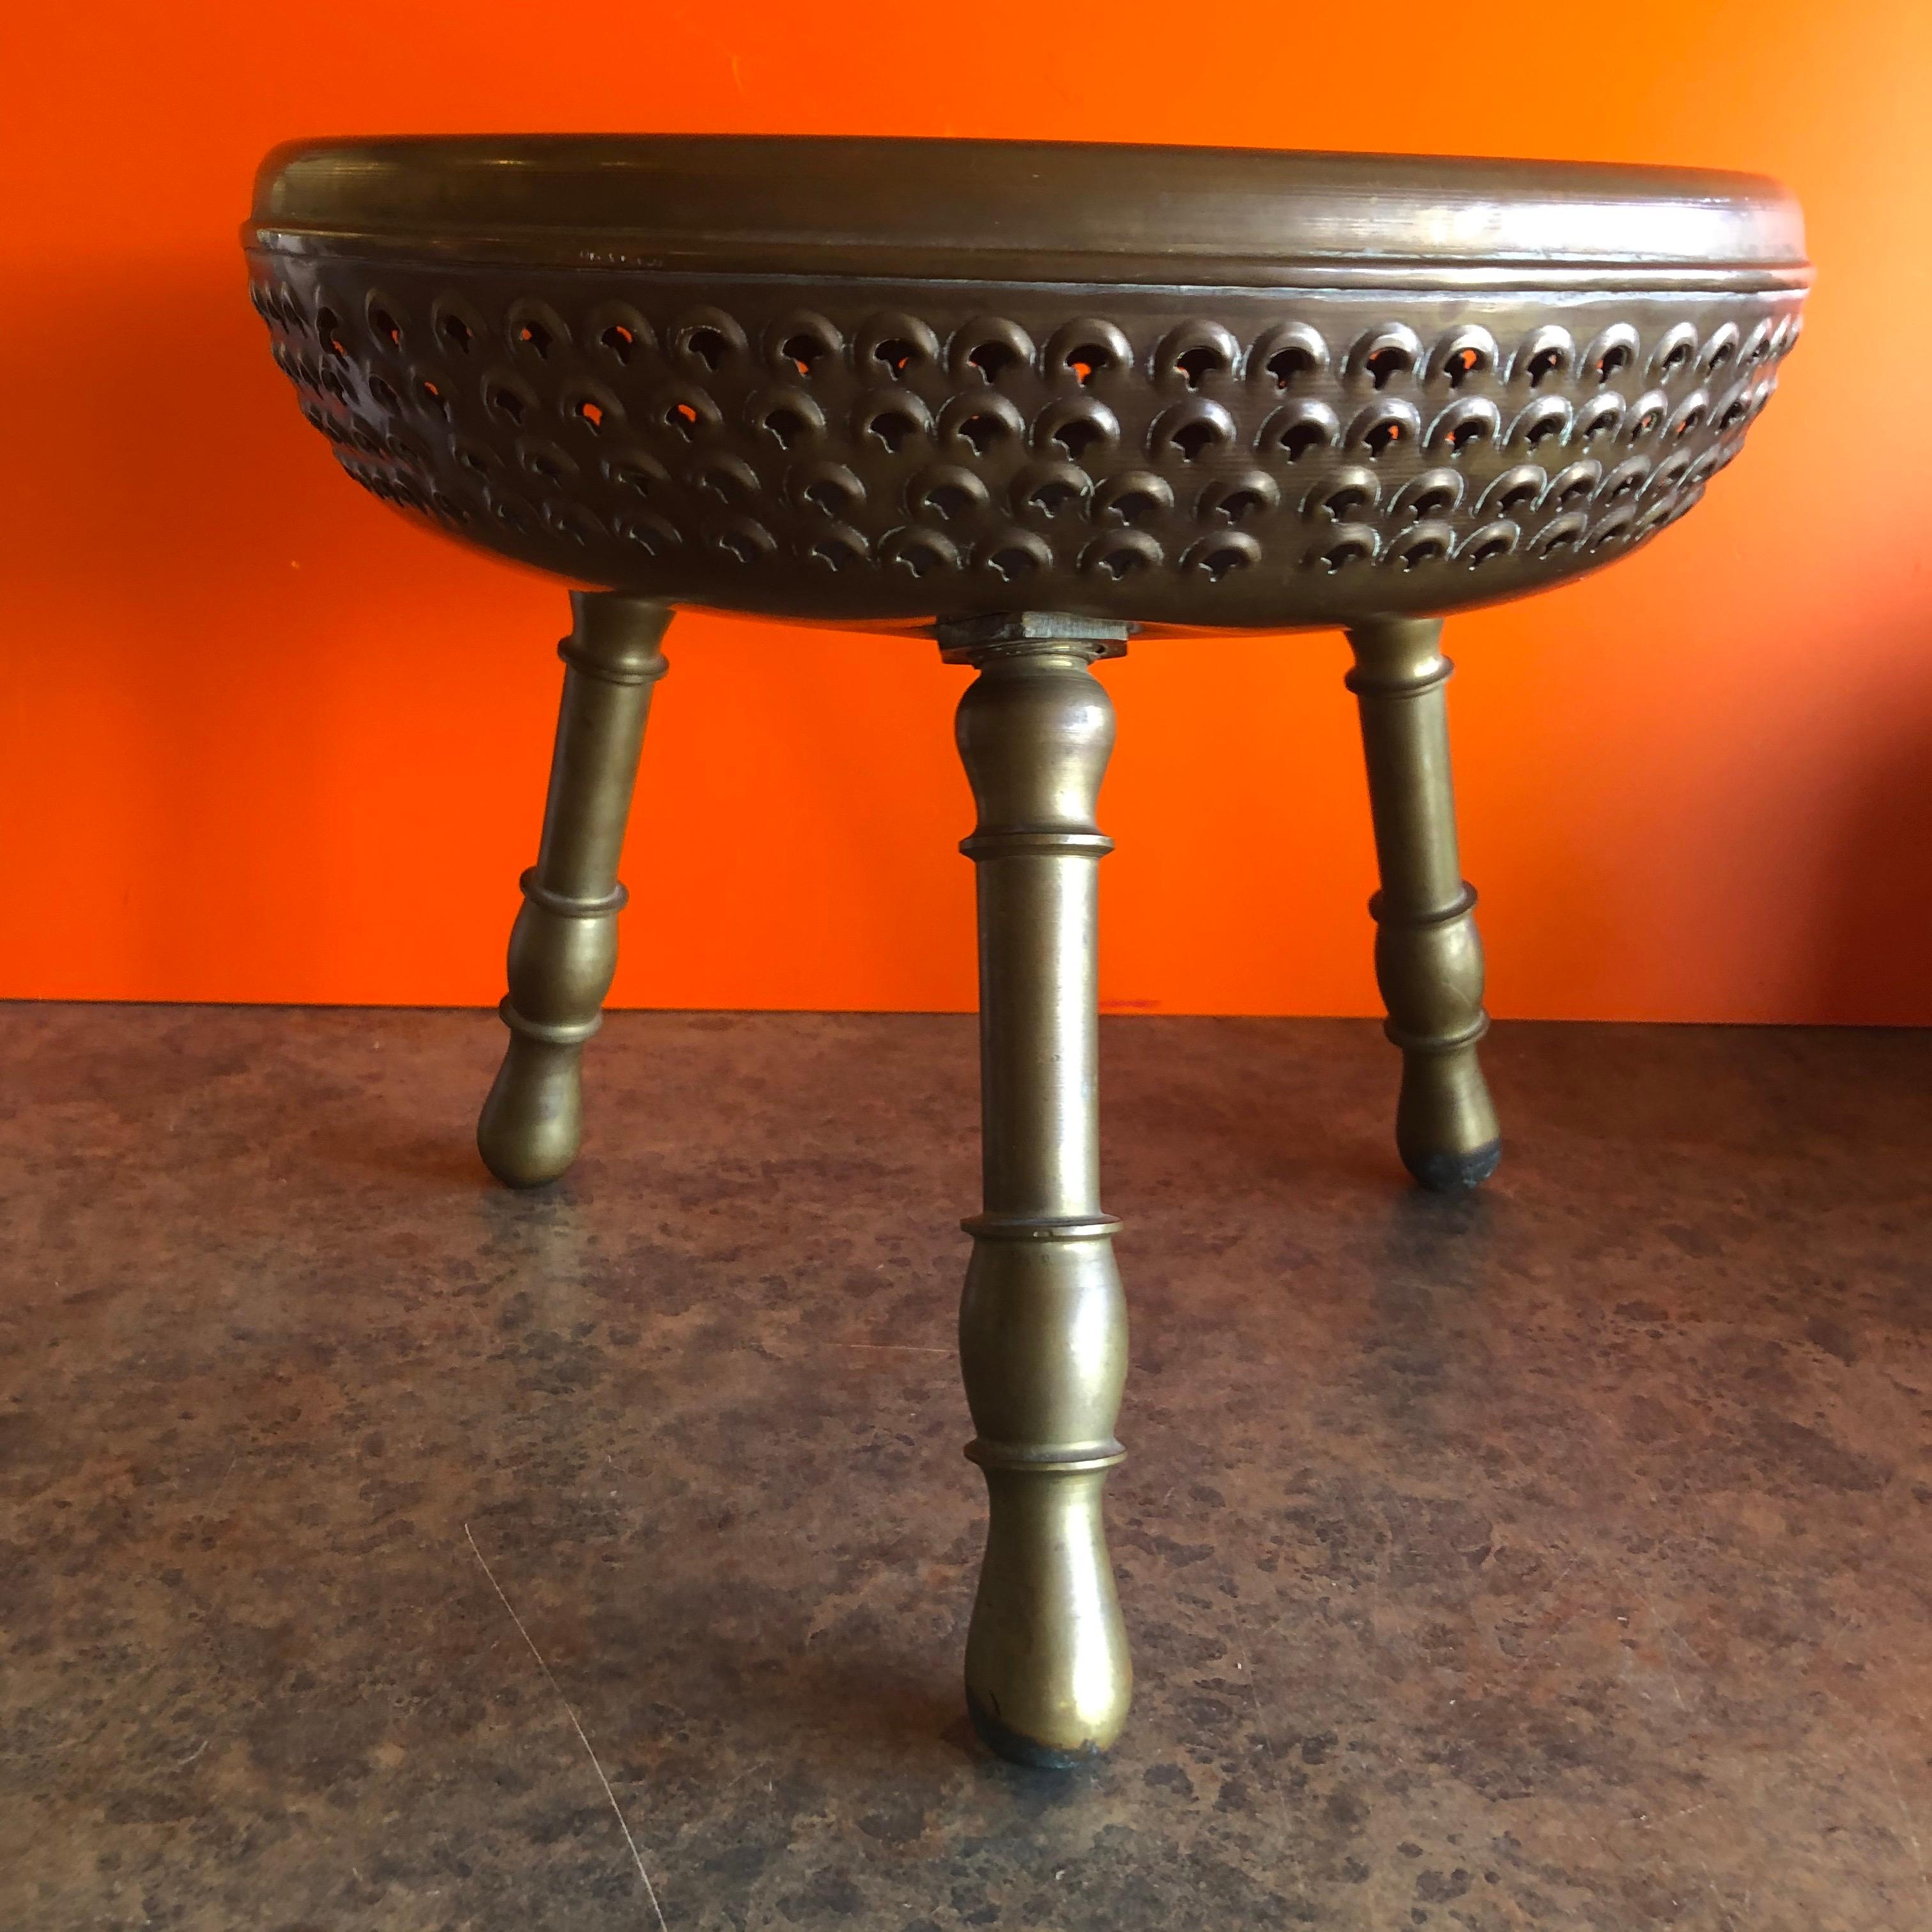 Indian brass three legged foot warmer / stool in brass, circa 1970s. Great patina finish and enscibed circular design; Legs unscrew for the fuel to be loaded and the stool to become a foot warmer. A very interesting, decorative and functional piece!